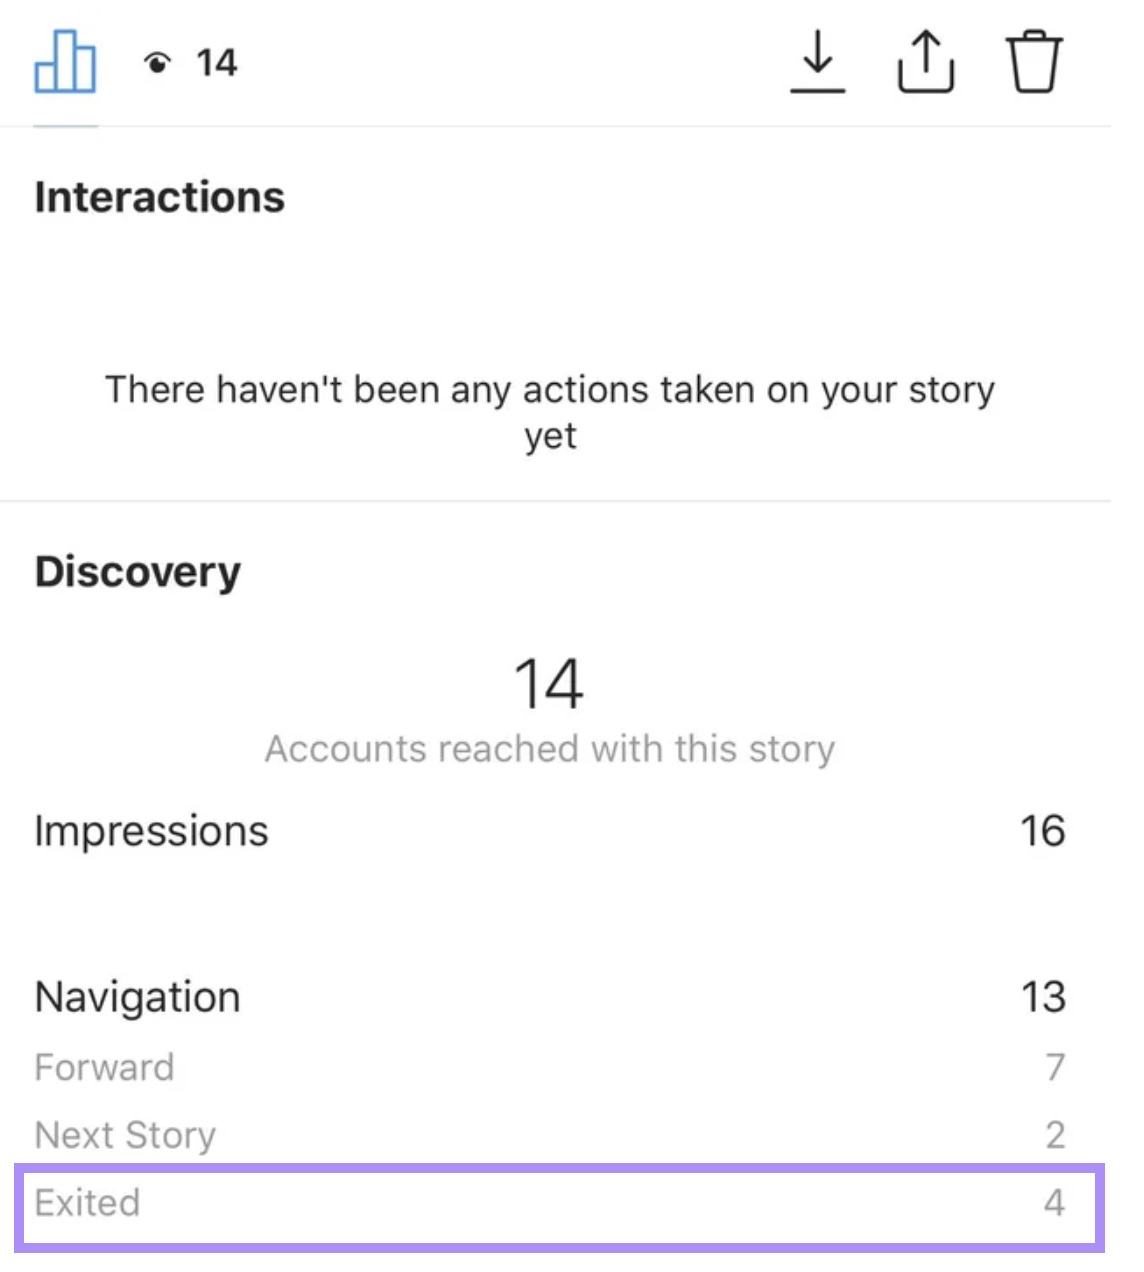 Instagram story metrics, with "exited" interactions highlighted